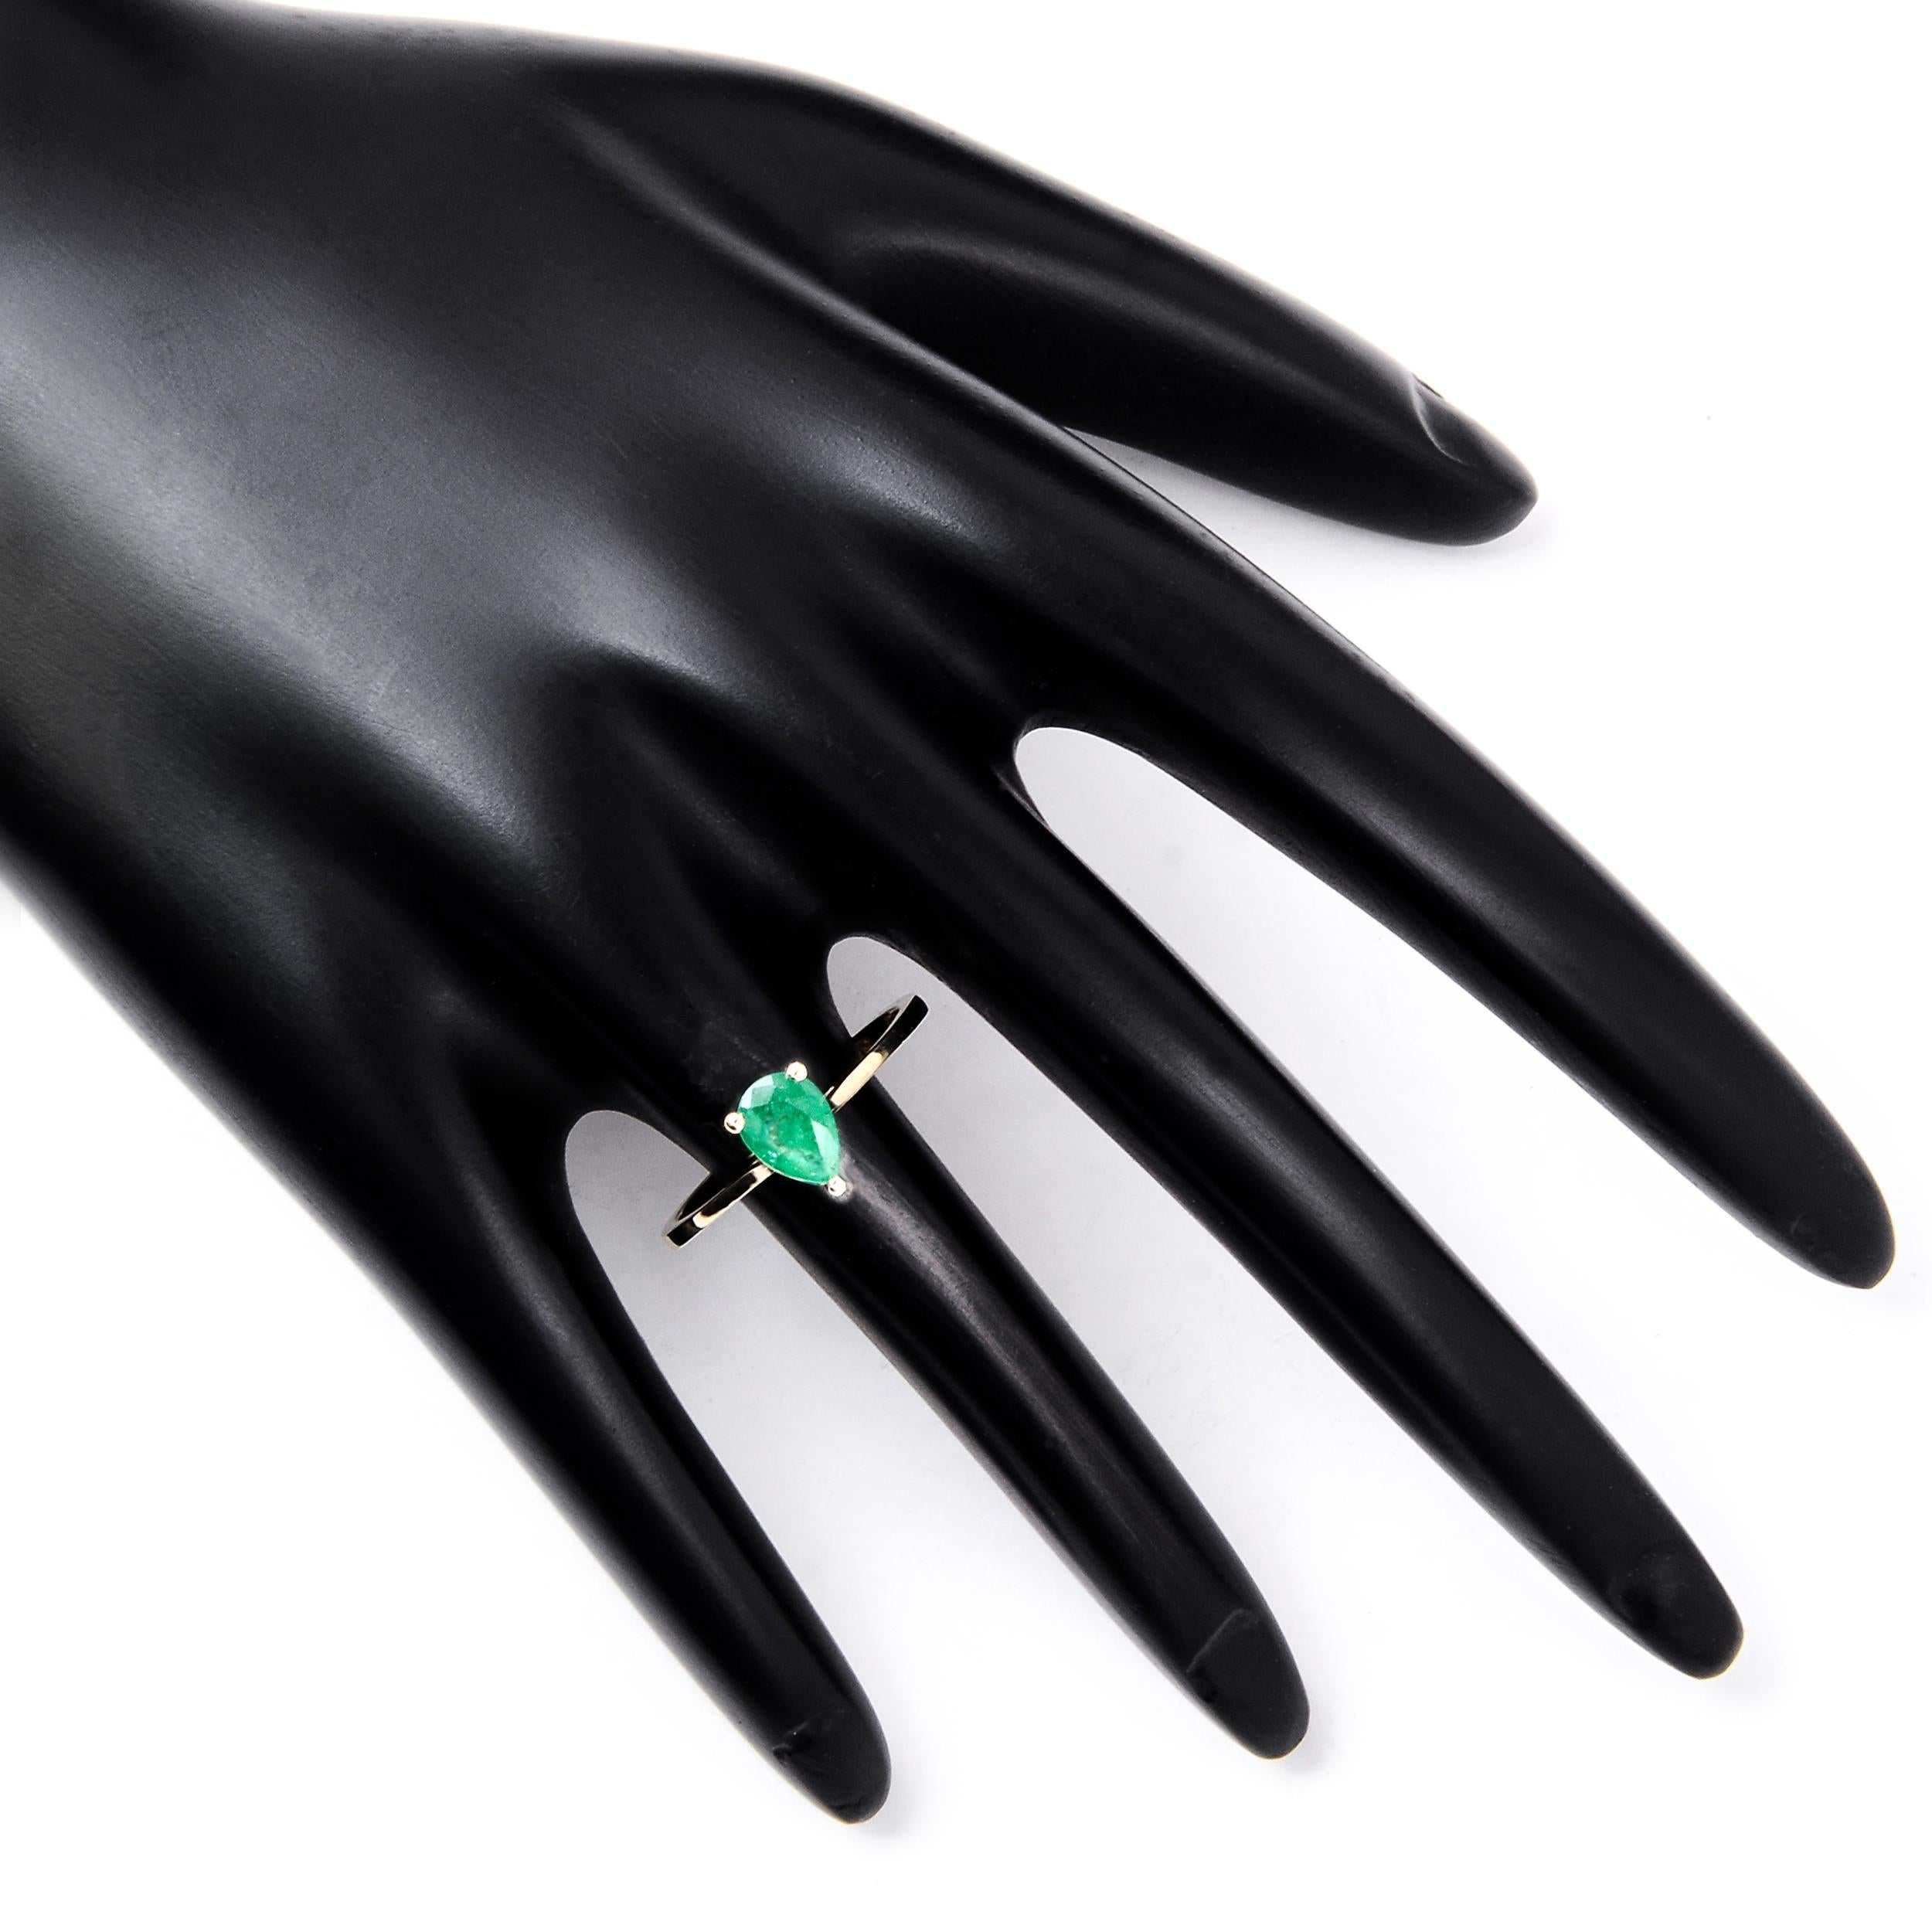 Luxurious 14K Emerald Cocktail Ring, Size 7 - Timeless & Elegant Statement Piece In New Condition For Sale In Holtsville, NY